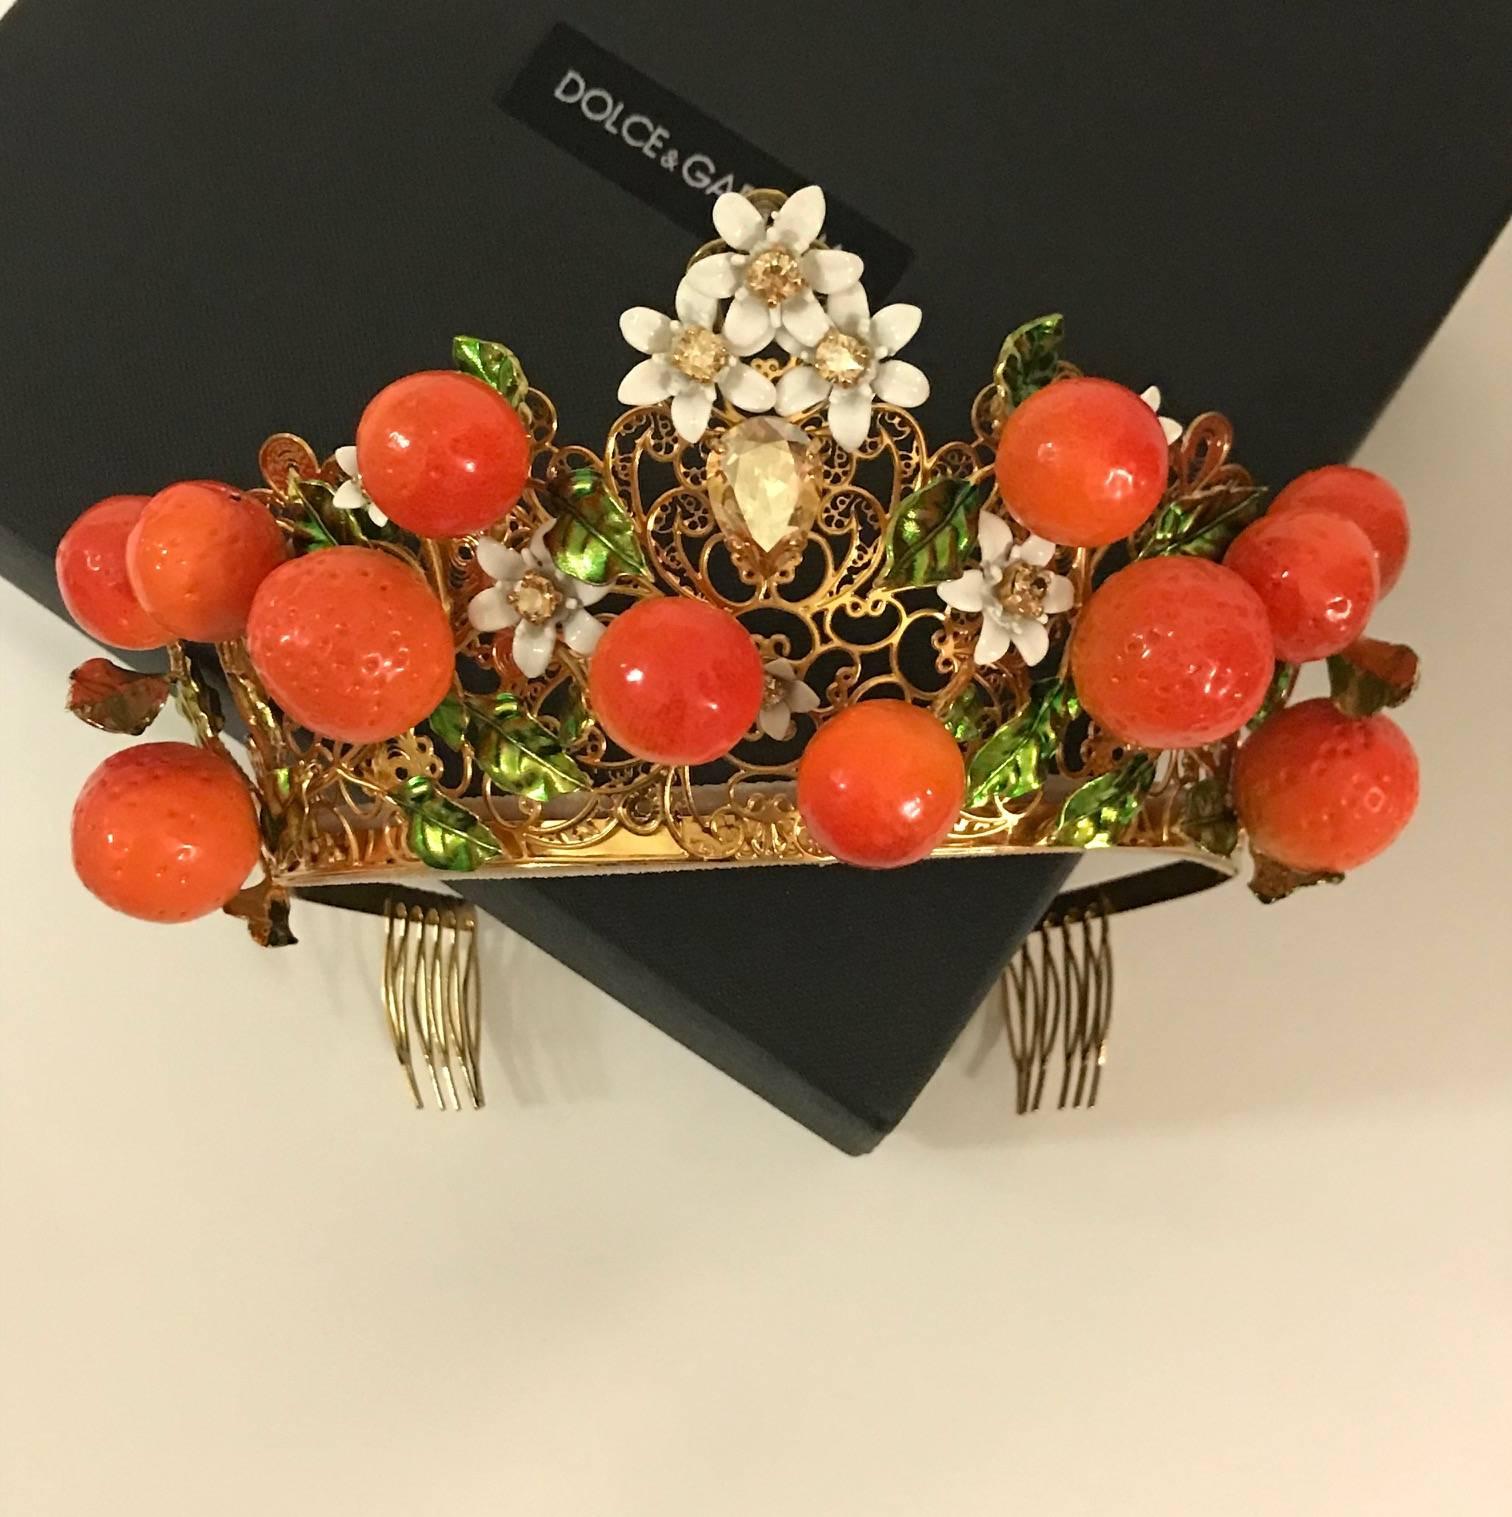 Dolce & Gabbana orange embellished tiara from the Resort 2016 collection. A super iconic Dolce & Gabbana piece!

Gold plated brass lattice base covered in Swarovski crystals, resin leaves & enamel oranges.

Combs at each side hold in crown in place.